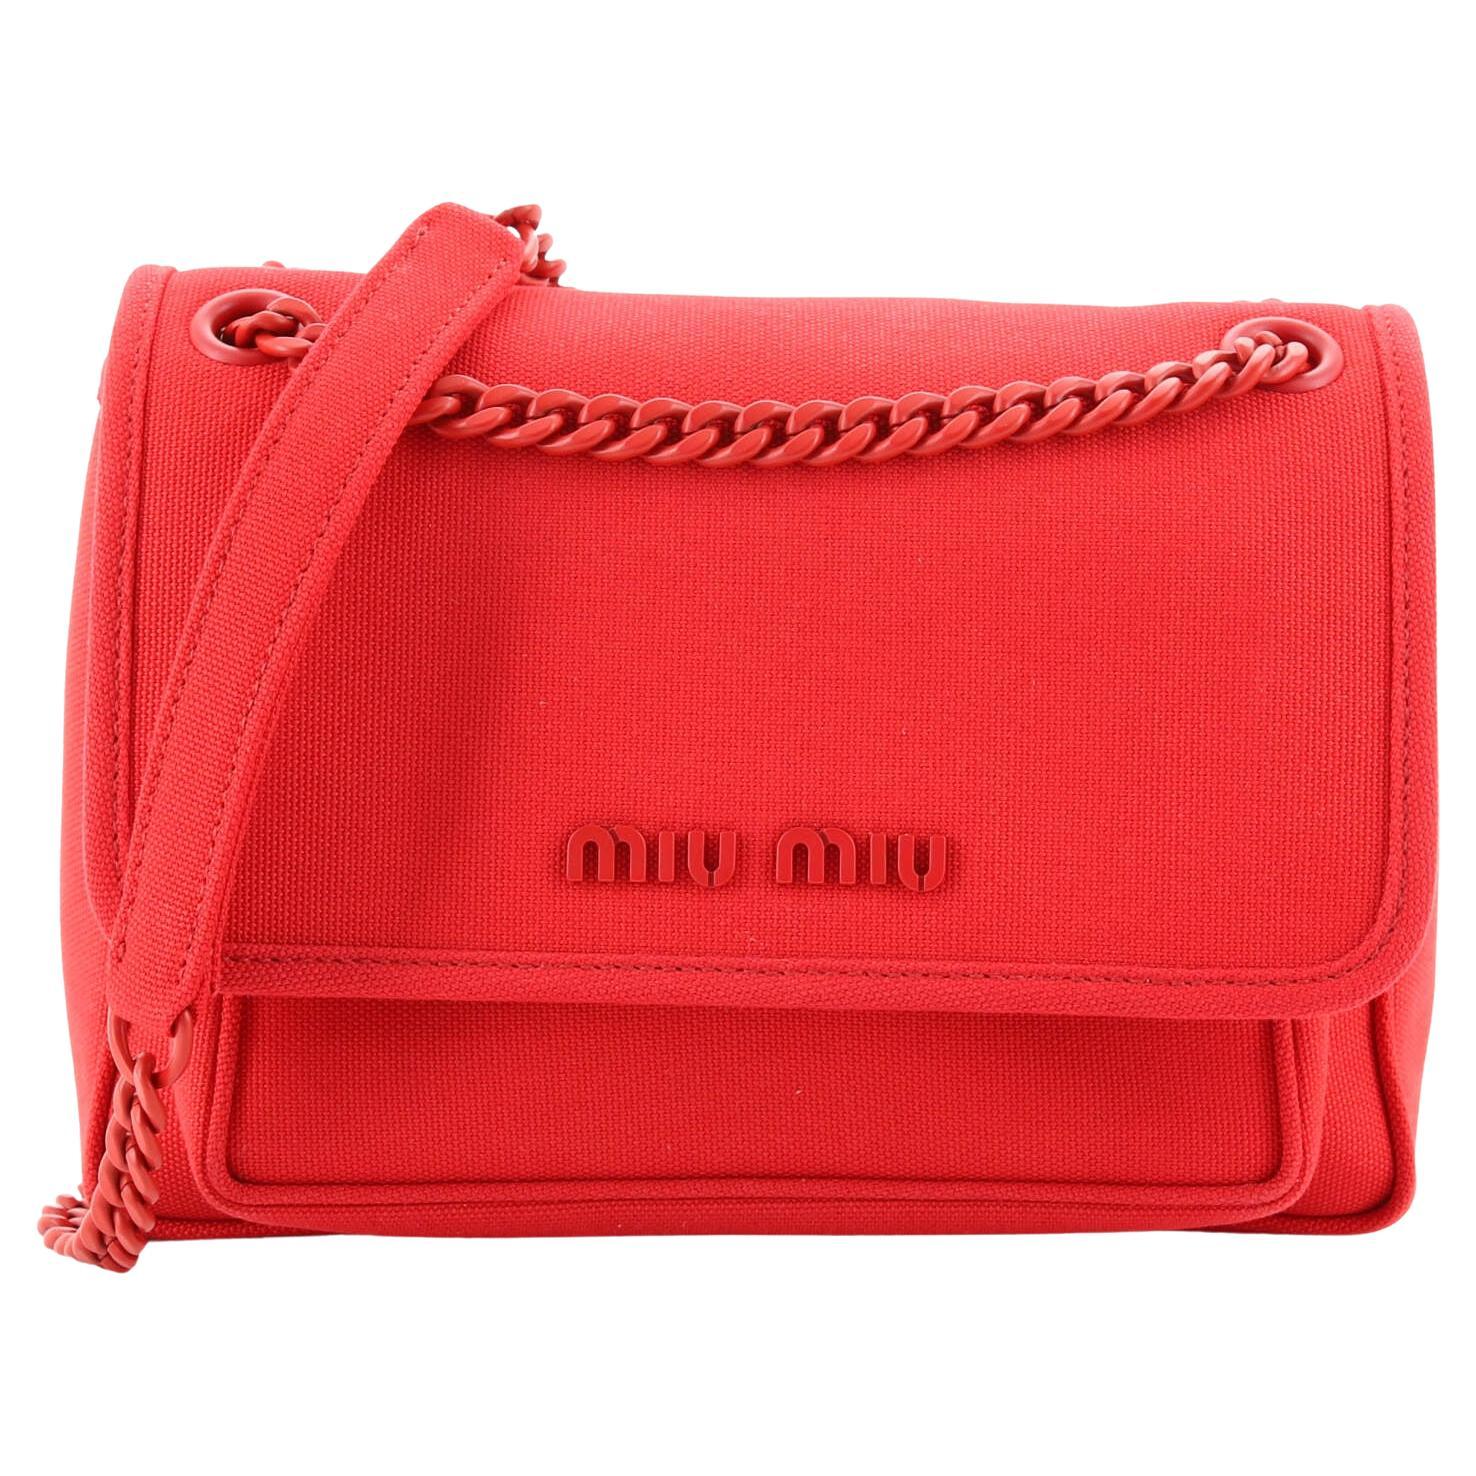 The above Equip Waste Miu Miu Monochrome Chain Flap Bag Canvas Small For Sale at 1stDibs